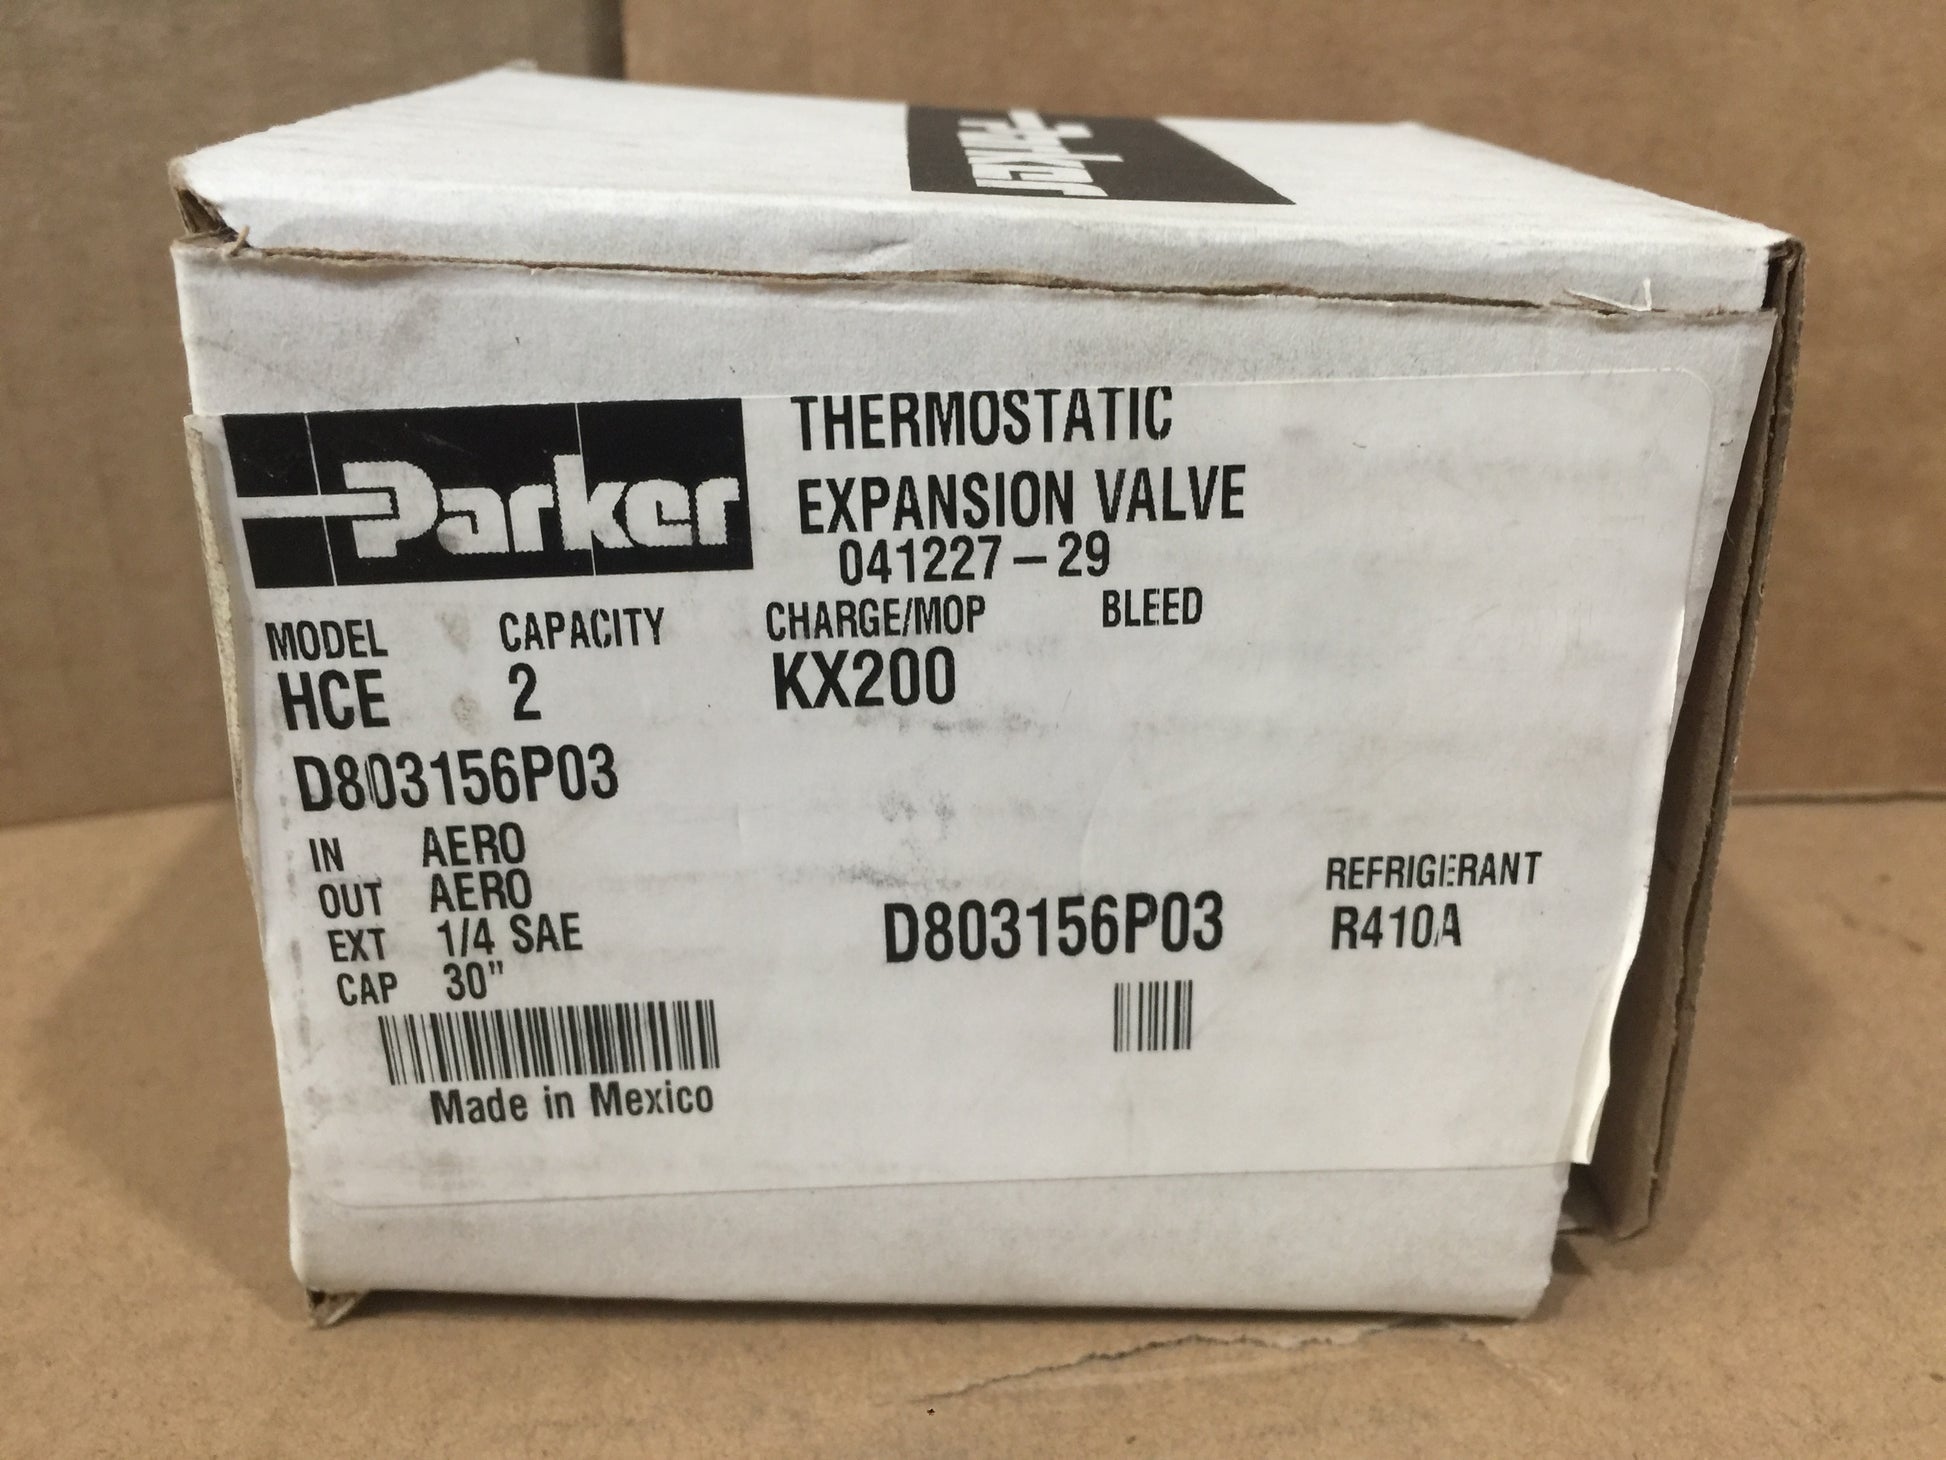 THERMOSTATIC EXPANSION VALVE; MODEL HCE, R-410A